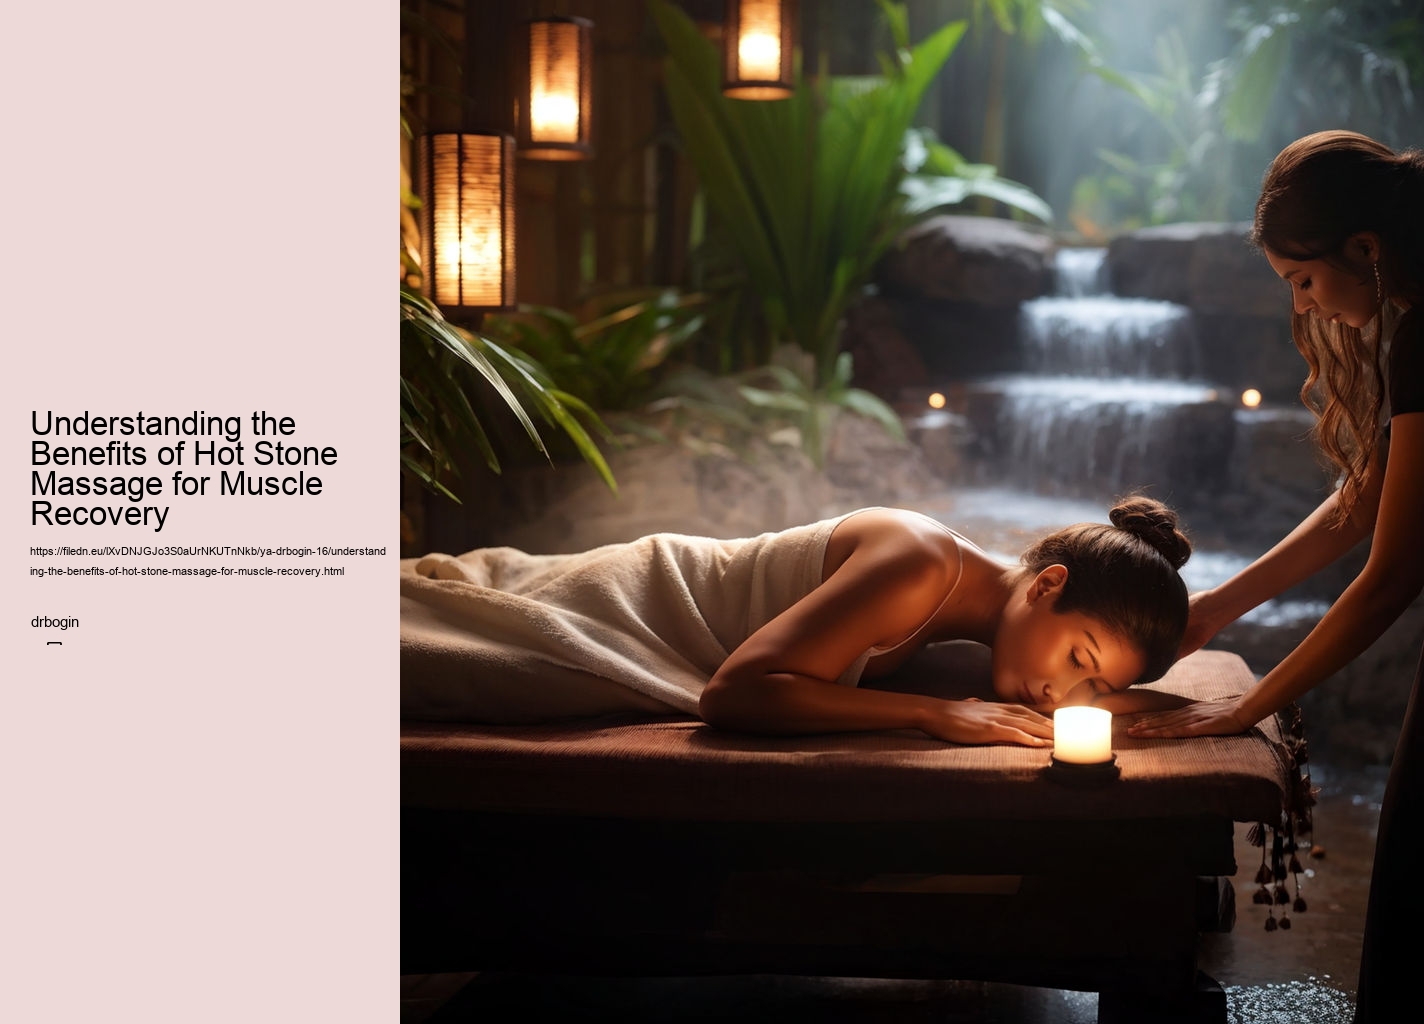 Understanding the Benefits of Hot Stone Massage for Muscle Recovery